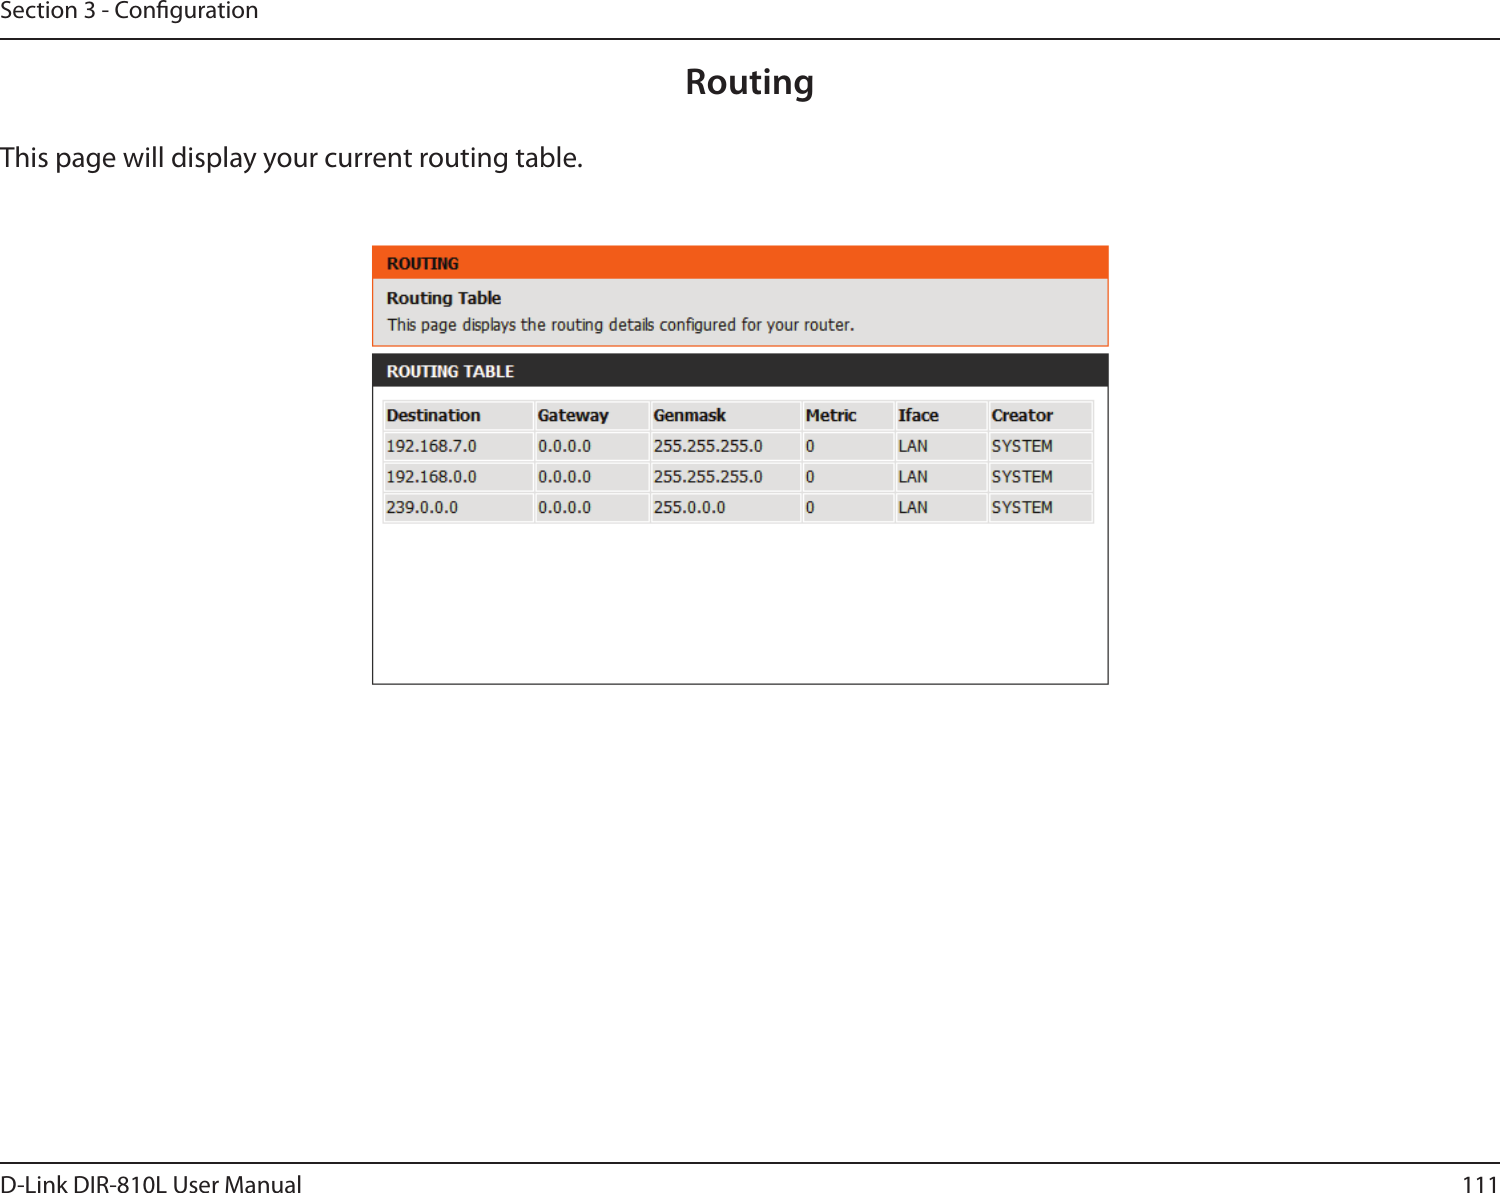 111D-Link DIR-810L User ManualSection 3 - CongurationRoutingThis page will display your current routing table.